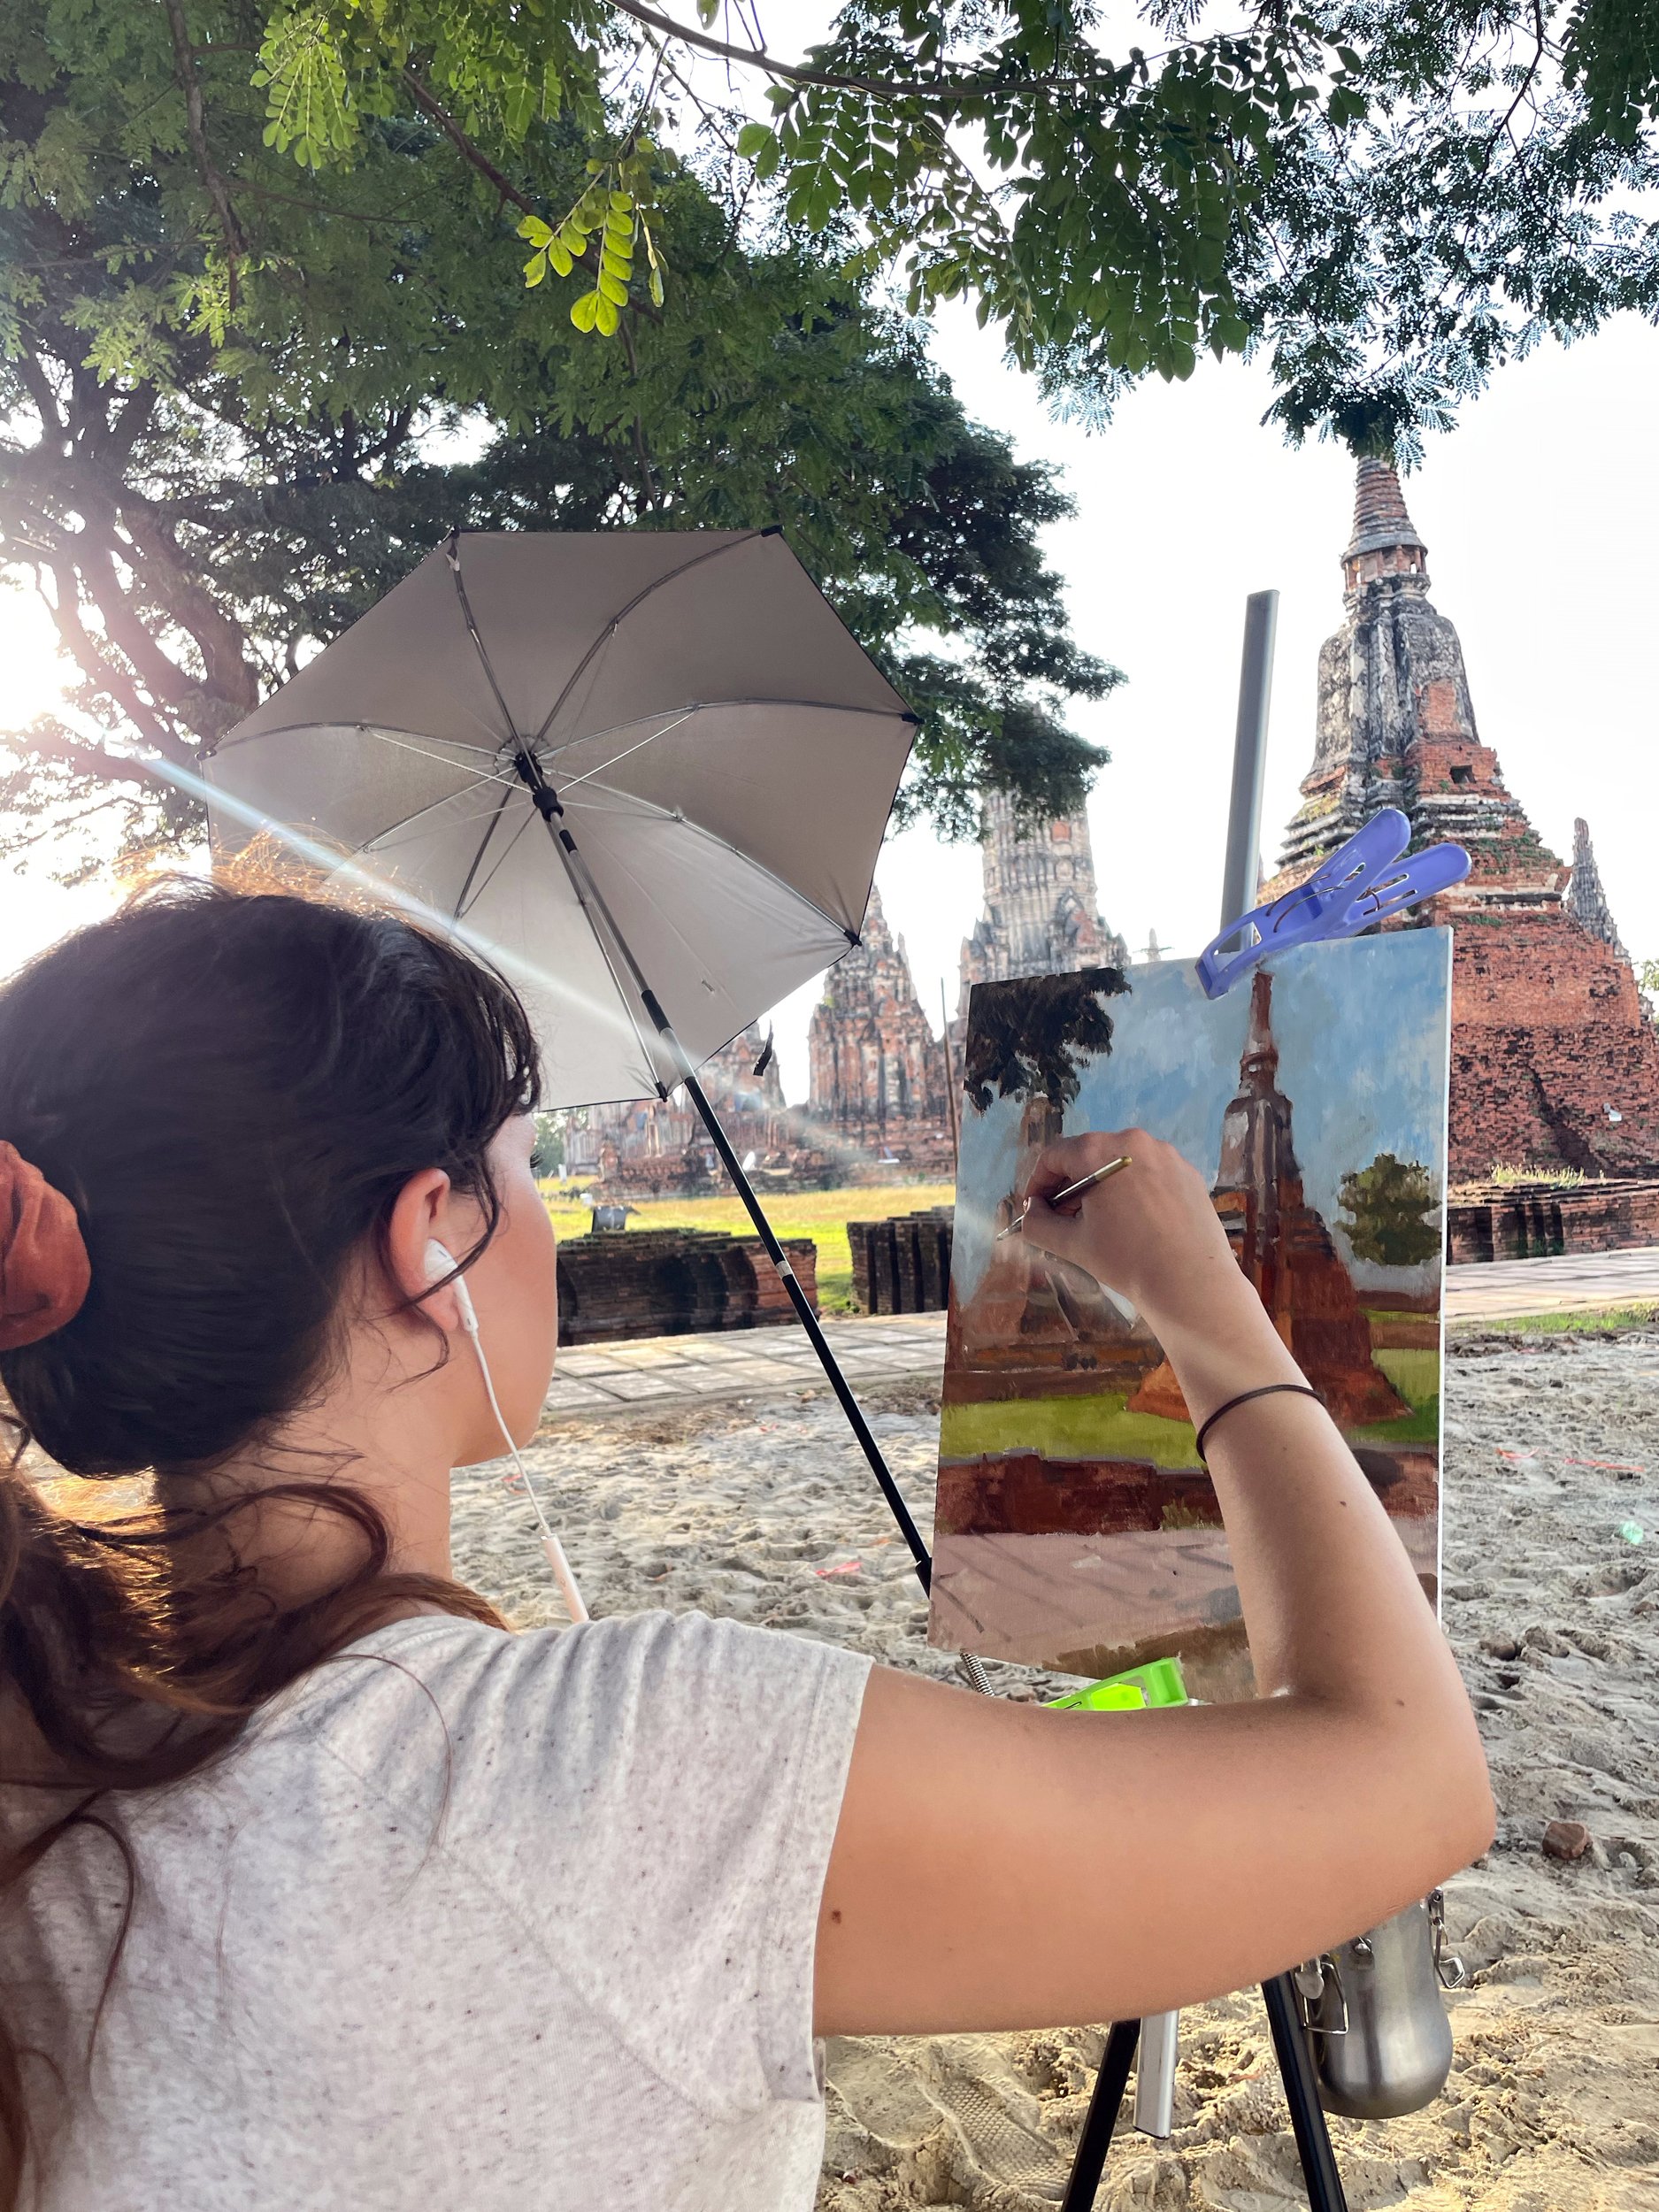 Marta's view of prang and chedi temple elements